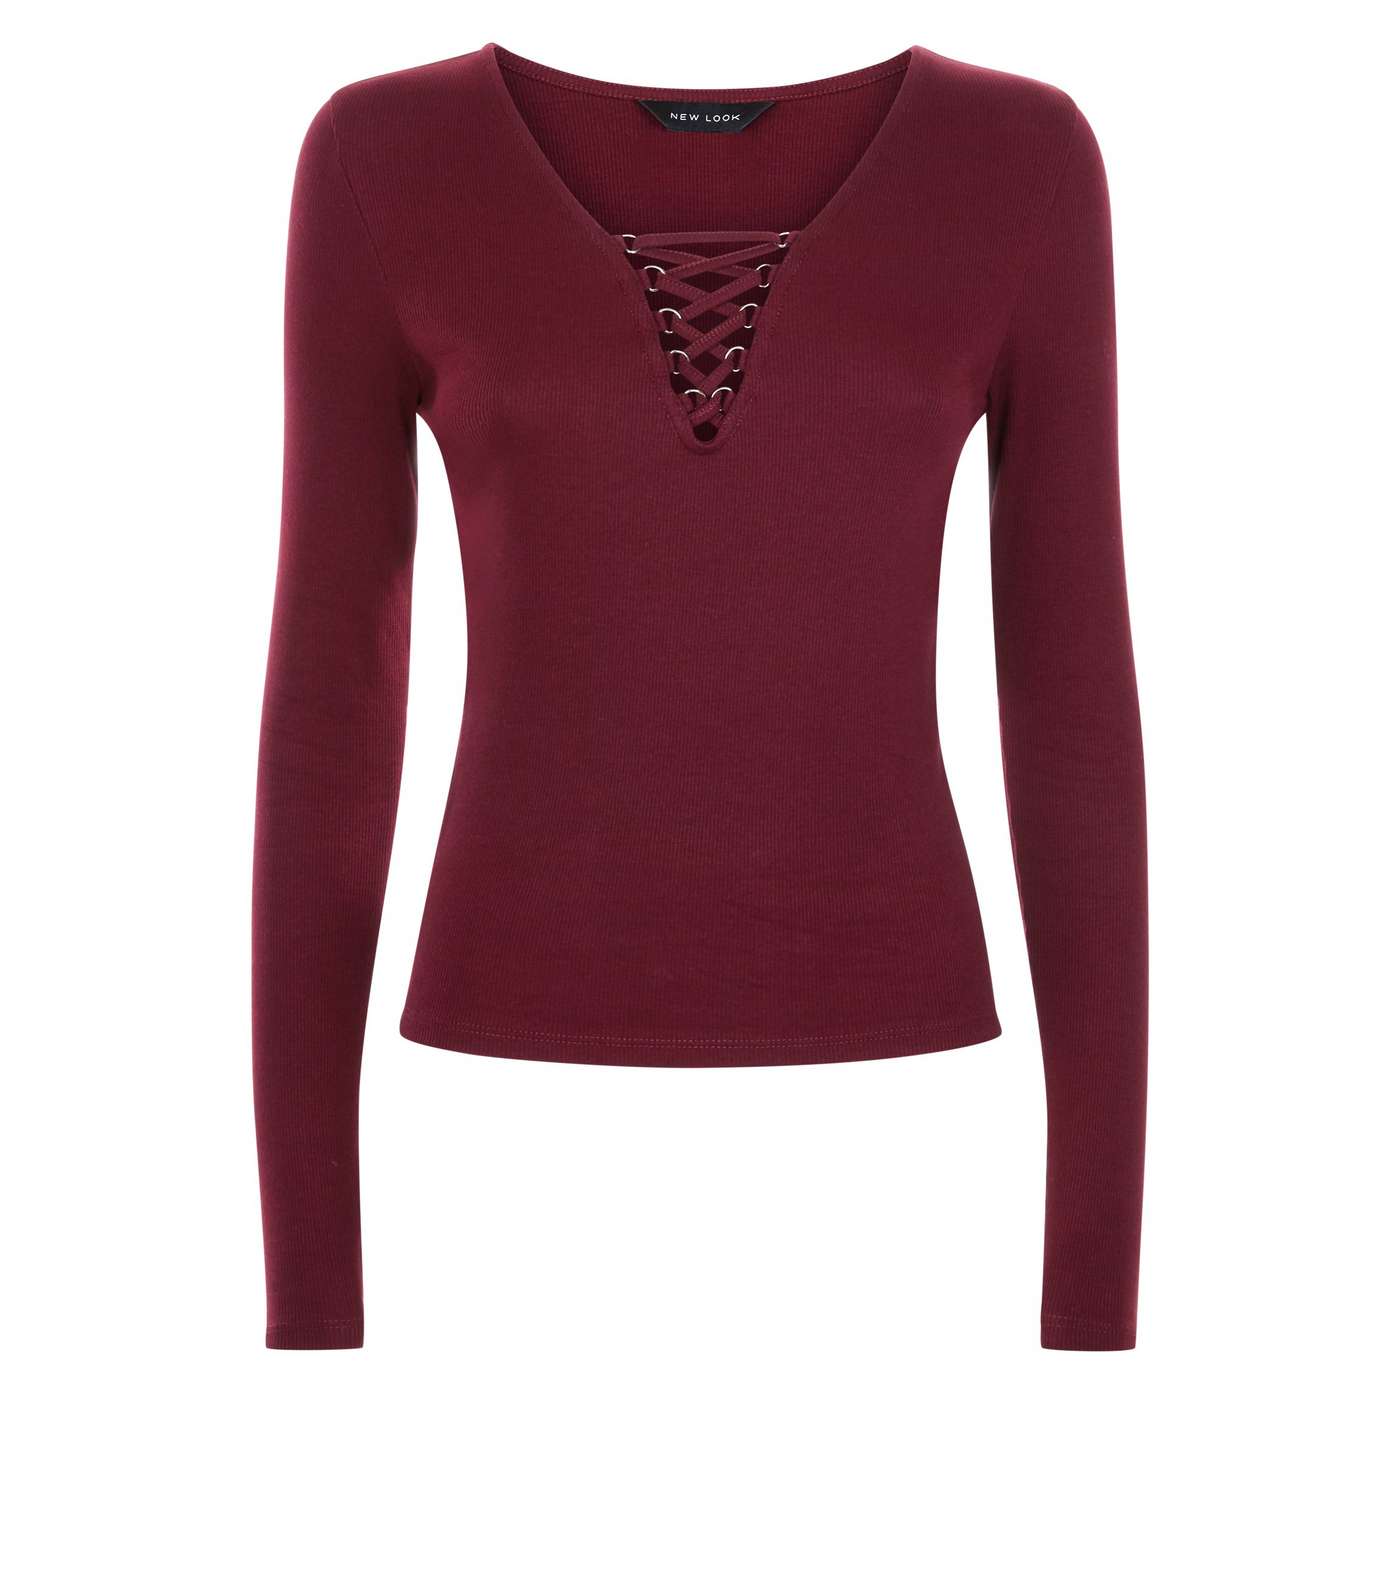 Burgundy Lace-Up Neck Long Sleeve Top Image 4